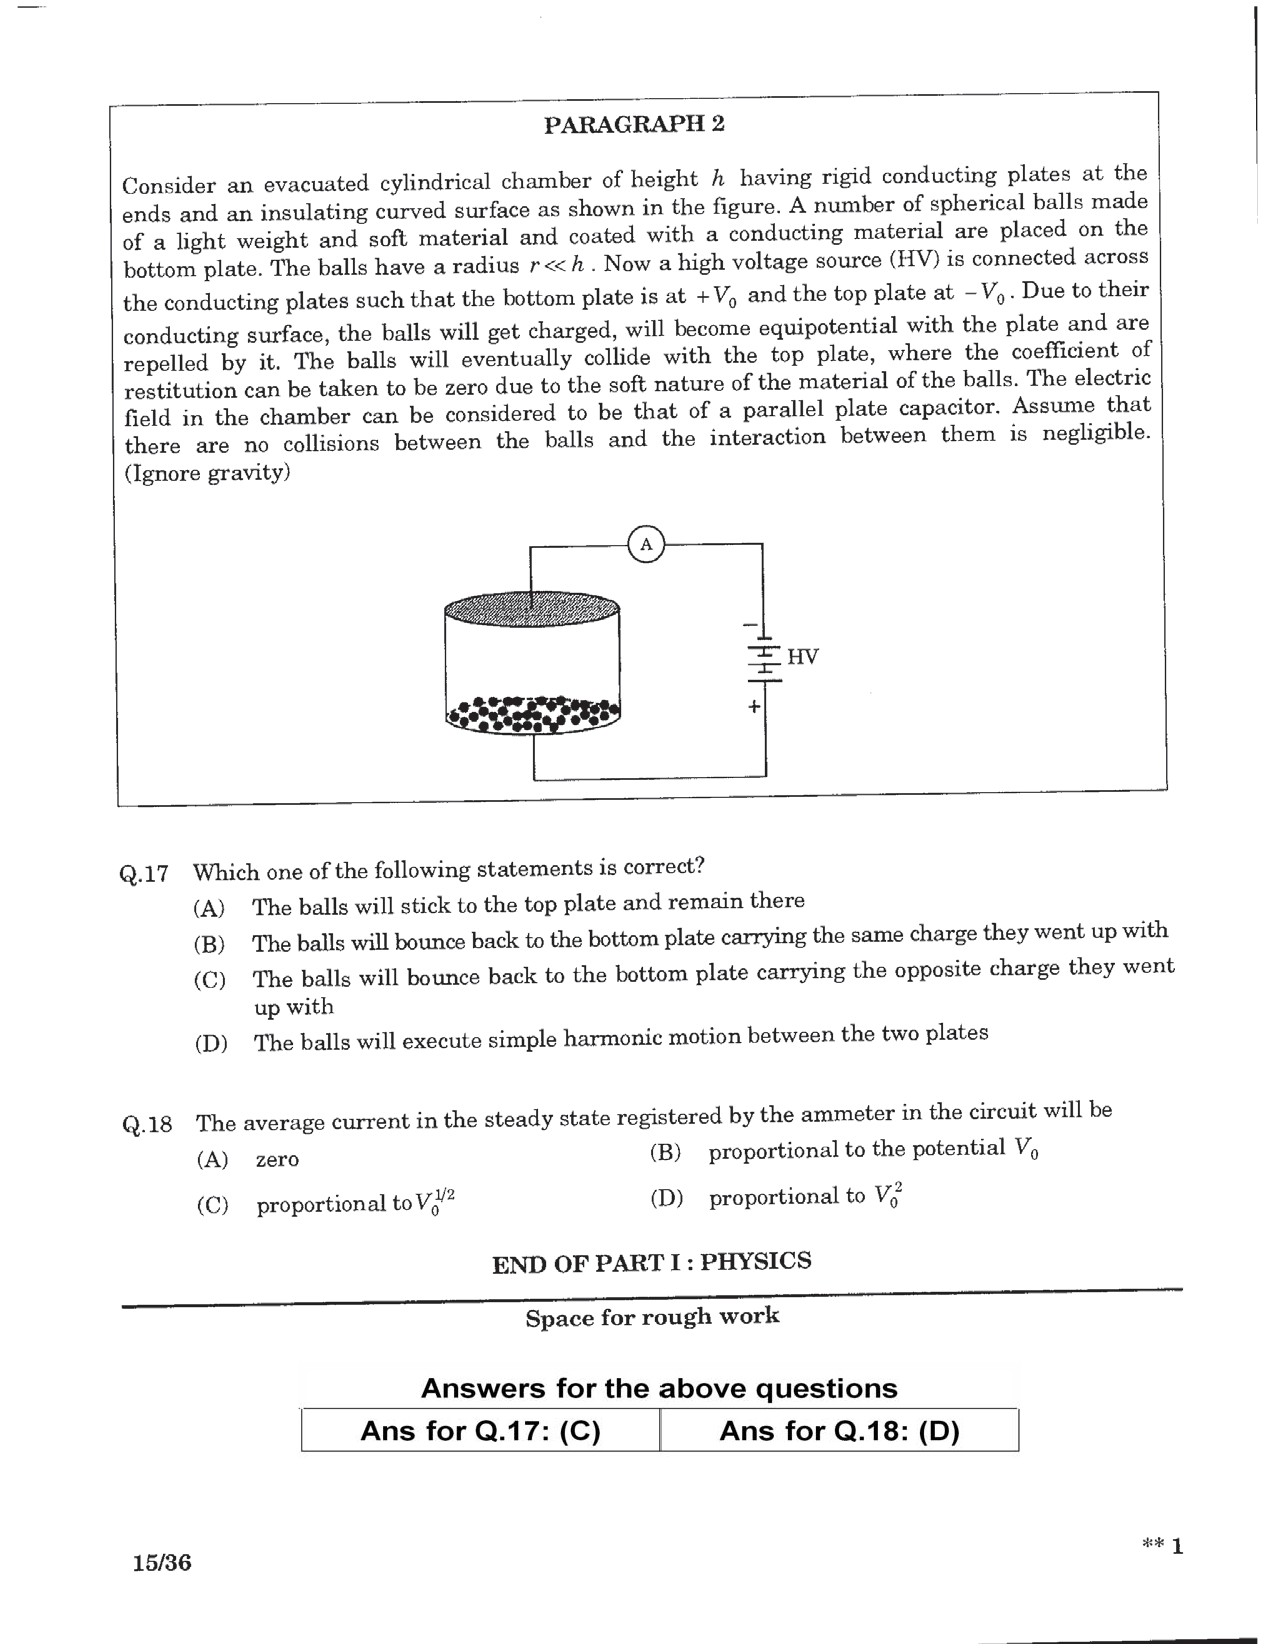 JEE Advanced Exam Question Paper 2016 Paper 2 Physics 13